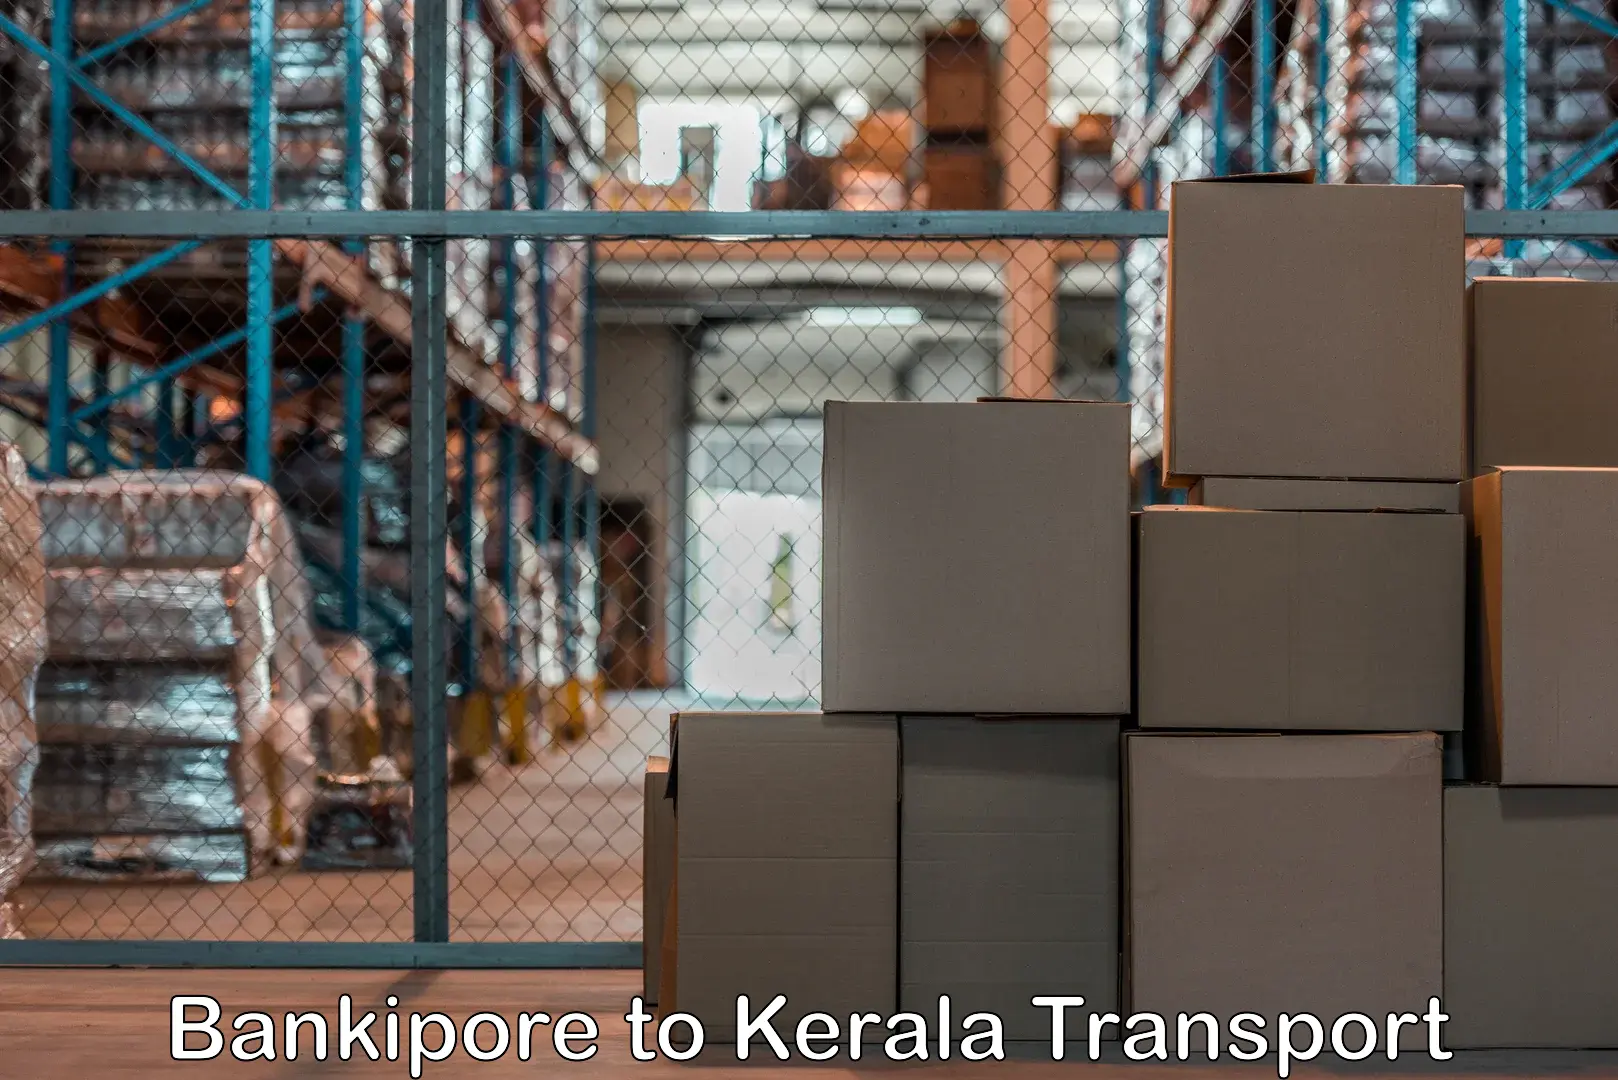 Road transport online services Bankipore to Punalur